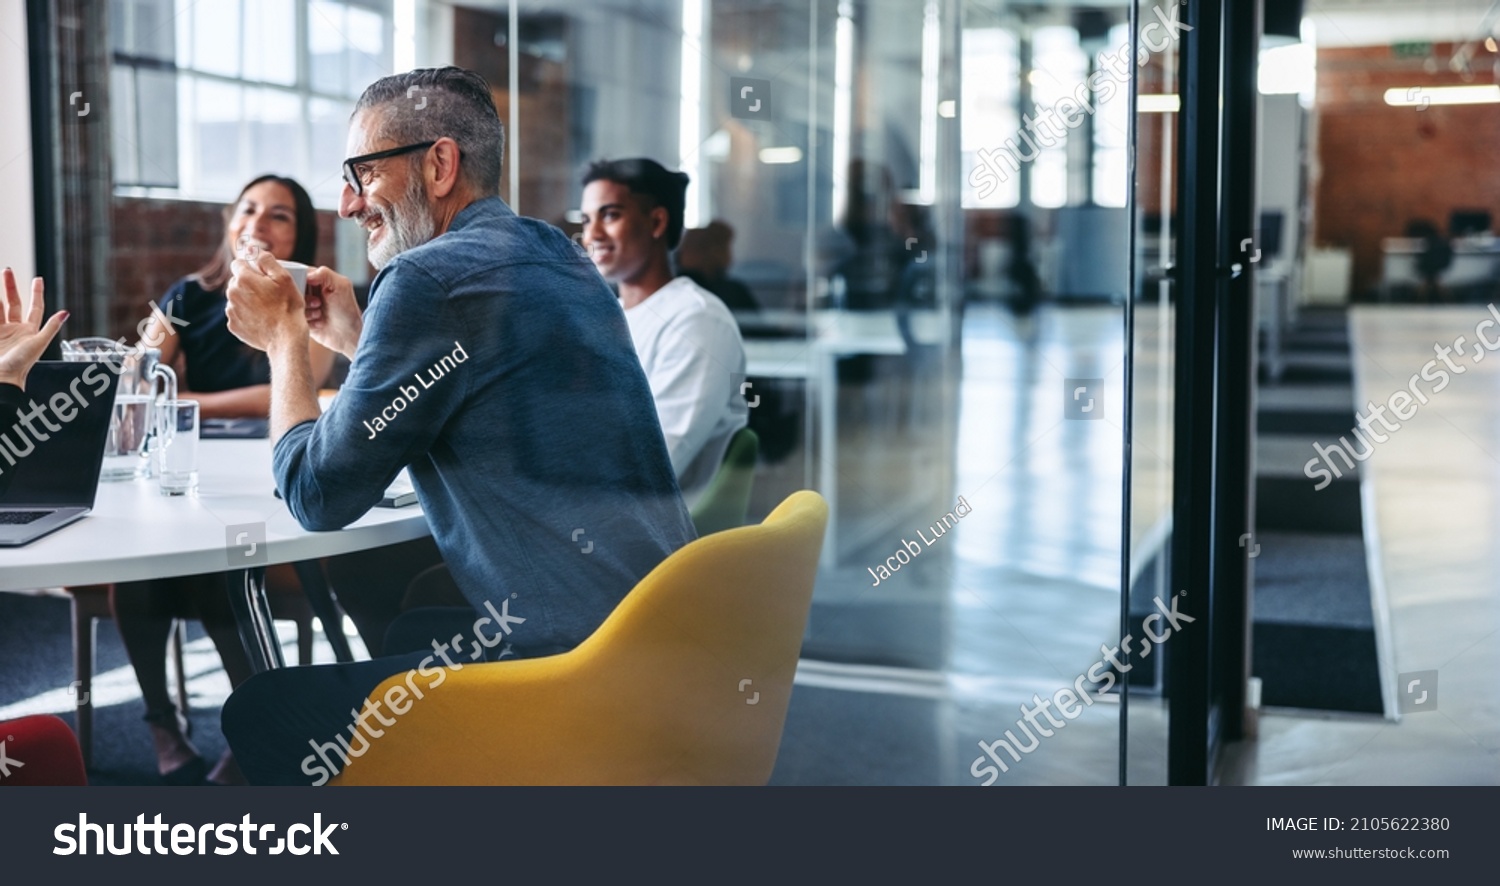 Cheerful mature businessman attending a meeting with his colleagues in an office. Experienced businessman smiling while sitting with his team in a meeting room. Creative businesspeople working together #2105622380